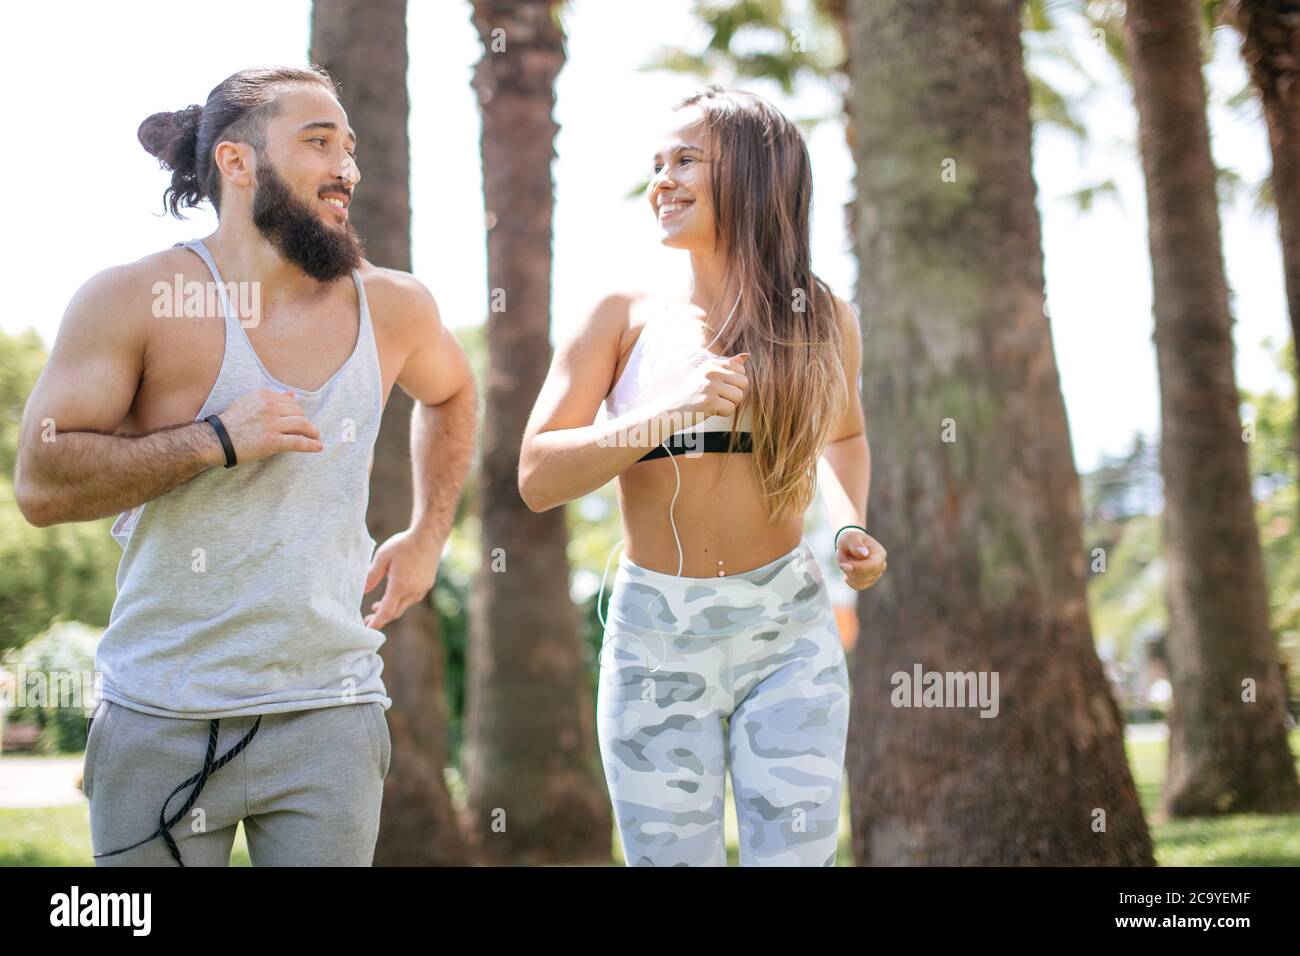 Summer Jogging Outfit: Over 3,475 Royalty-Free Licensable Stock Photos